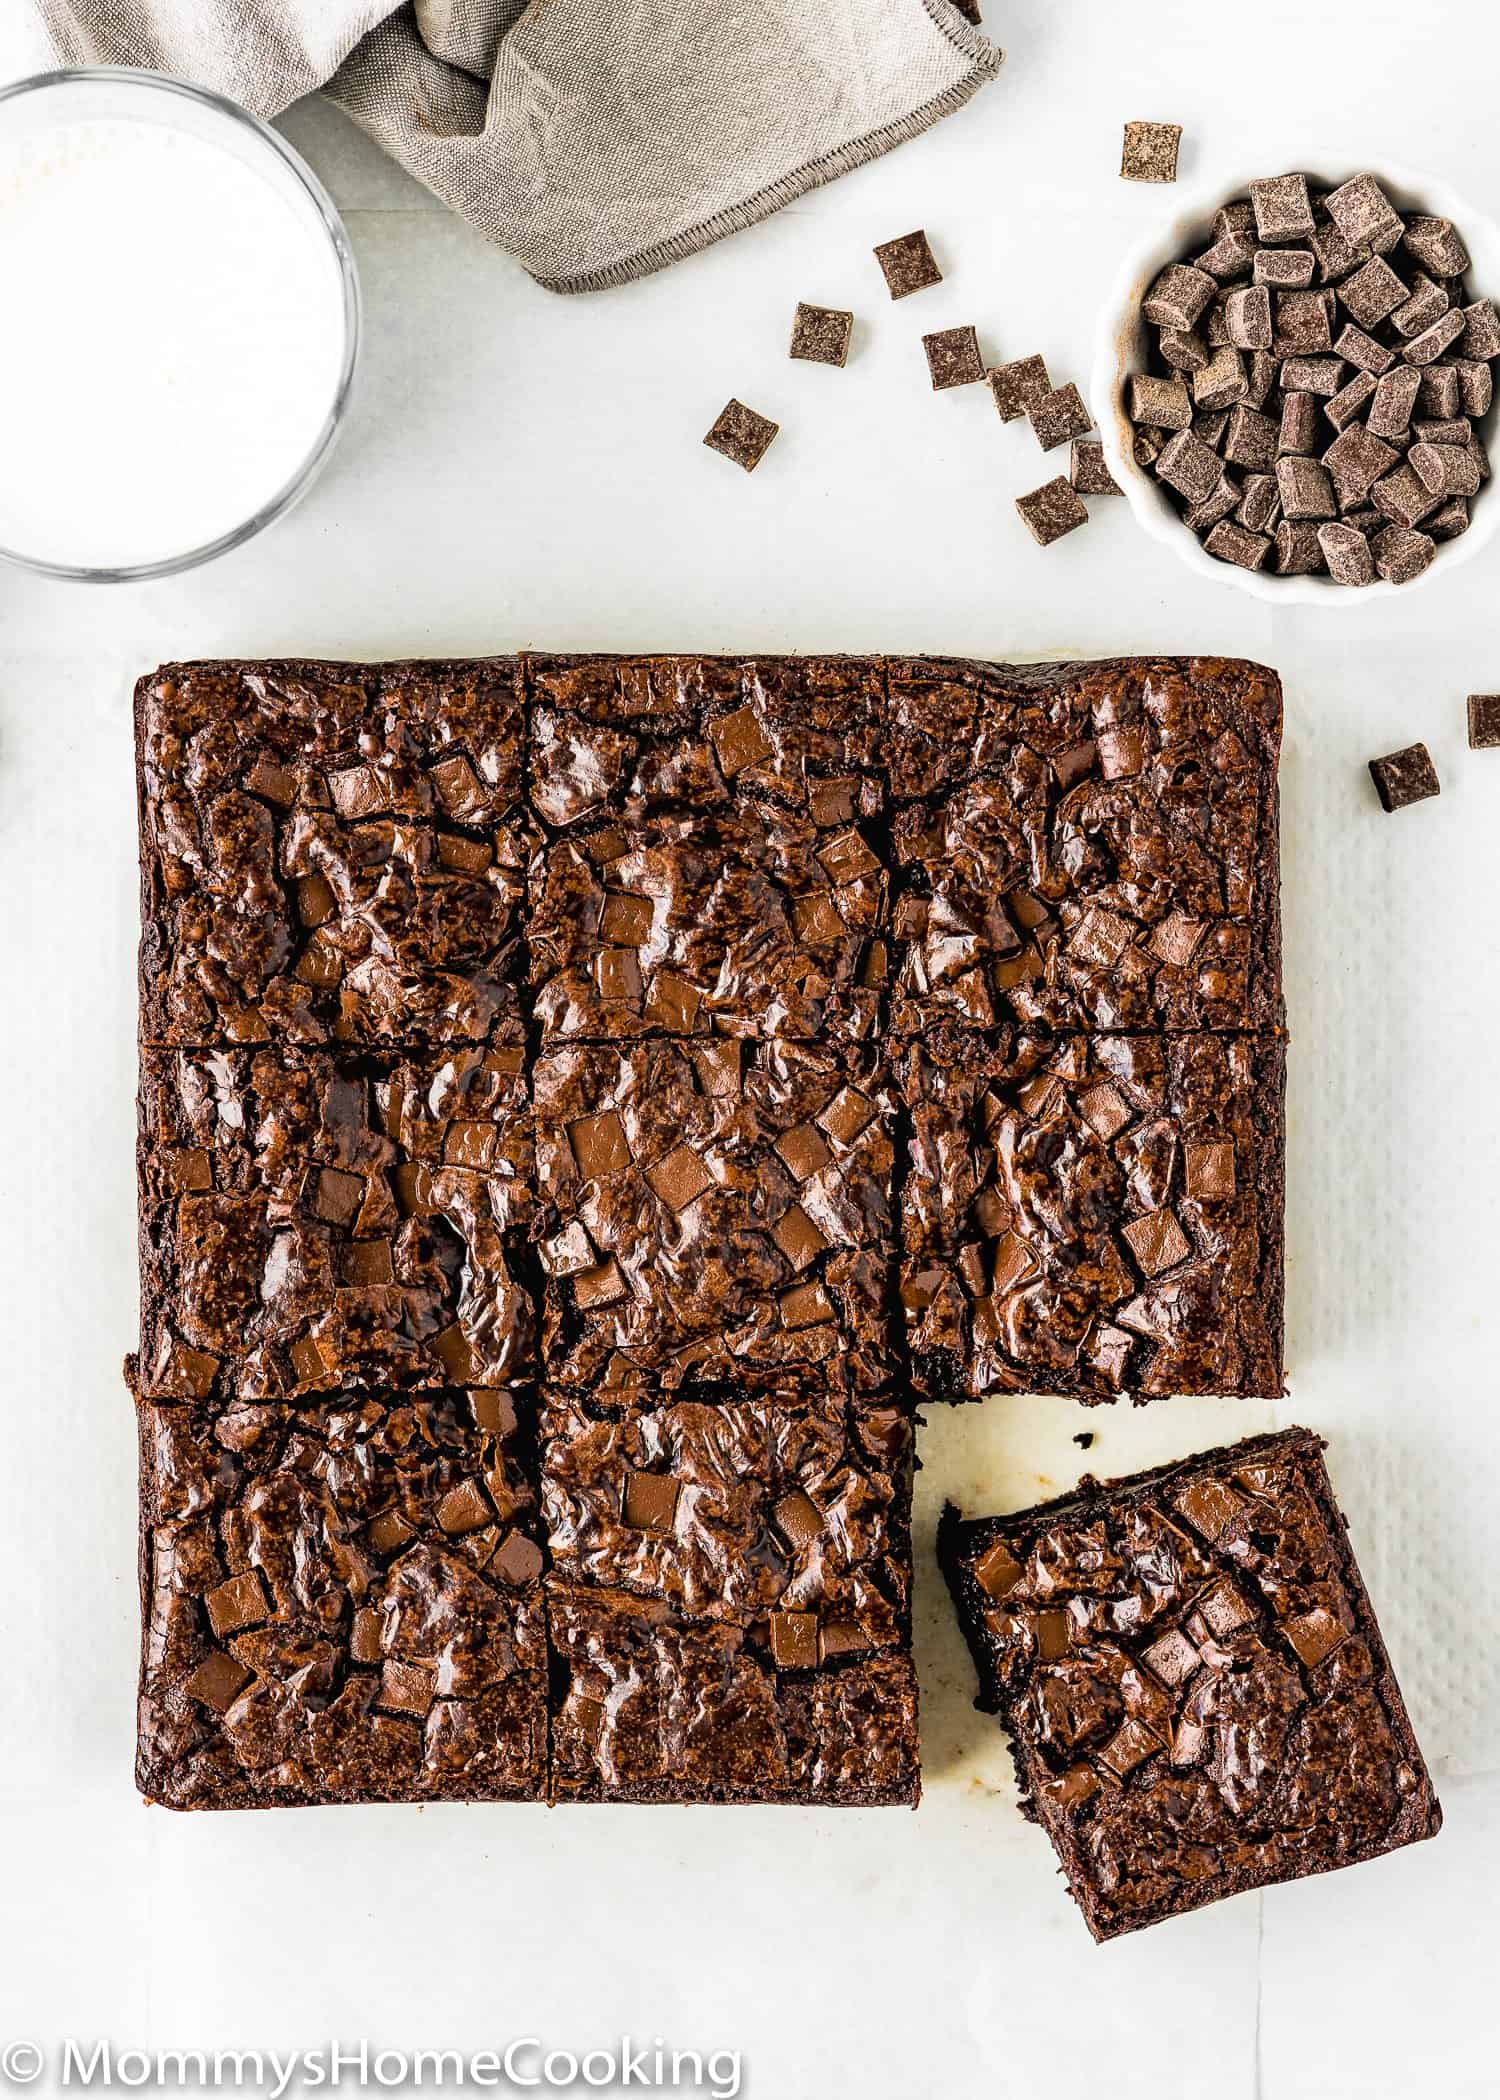 egg-free brownies cut into squares over a white surface with a glass of milk and chocolate chunks on the side.